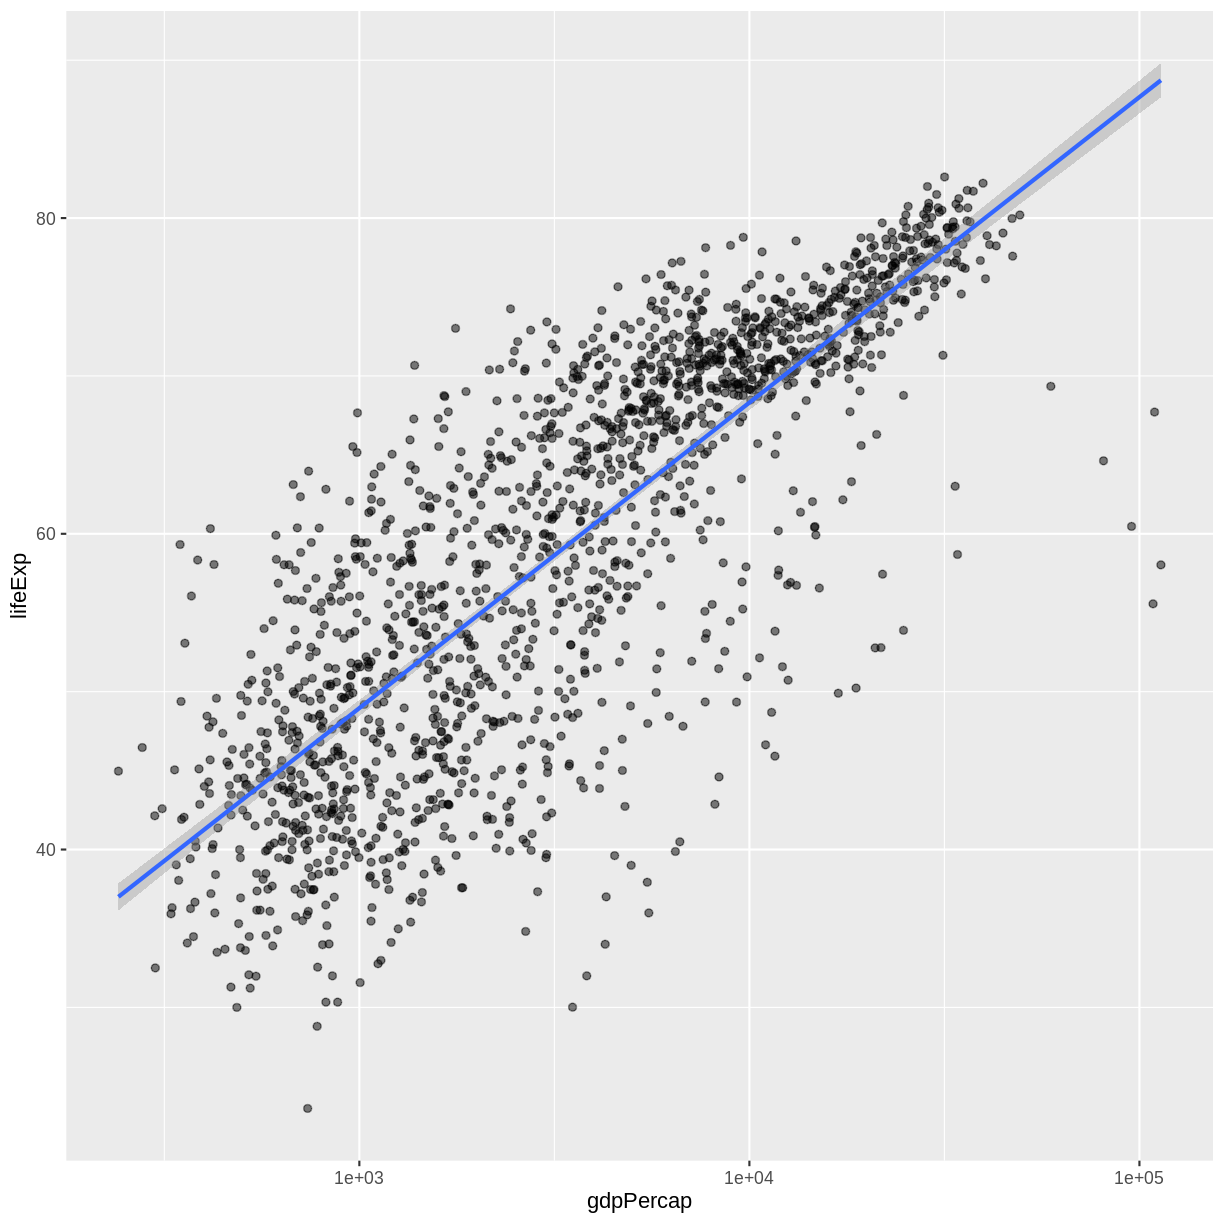 Scatter plot of life expectancy vs GDP per capita with a blue trend line summarising the relationship between variables, and gray shaded area indicating 95% confidence intervals for that trend line.